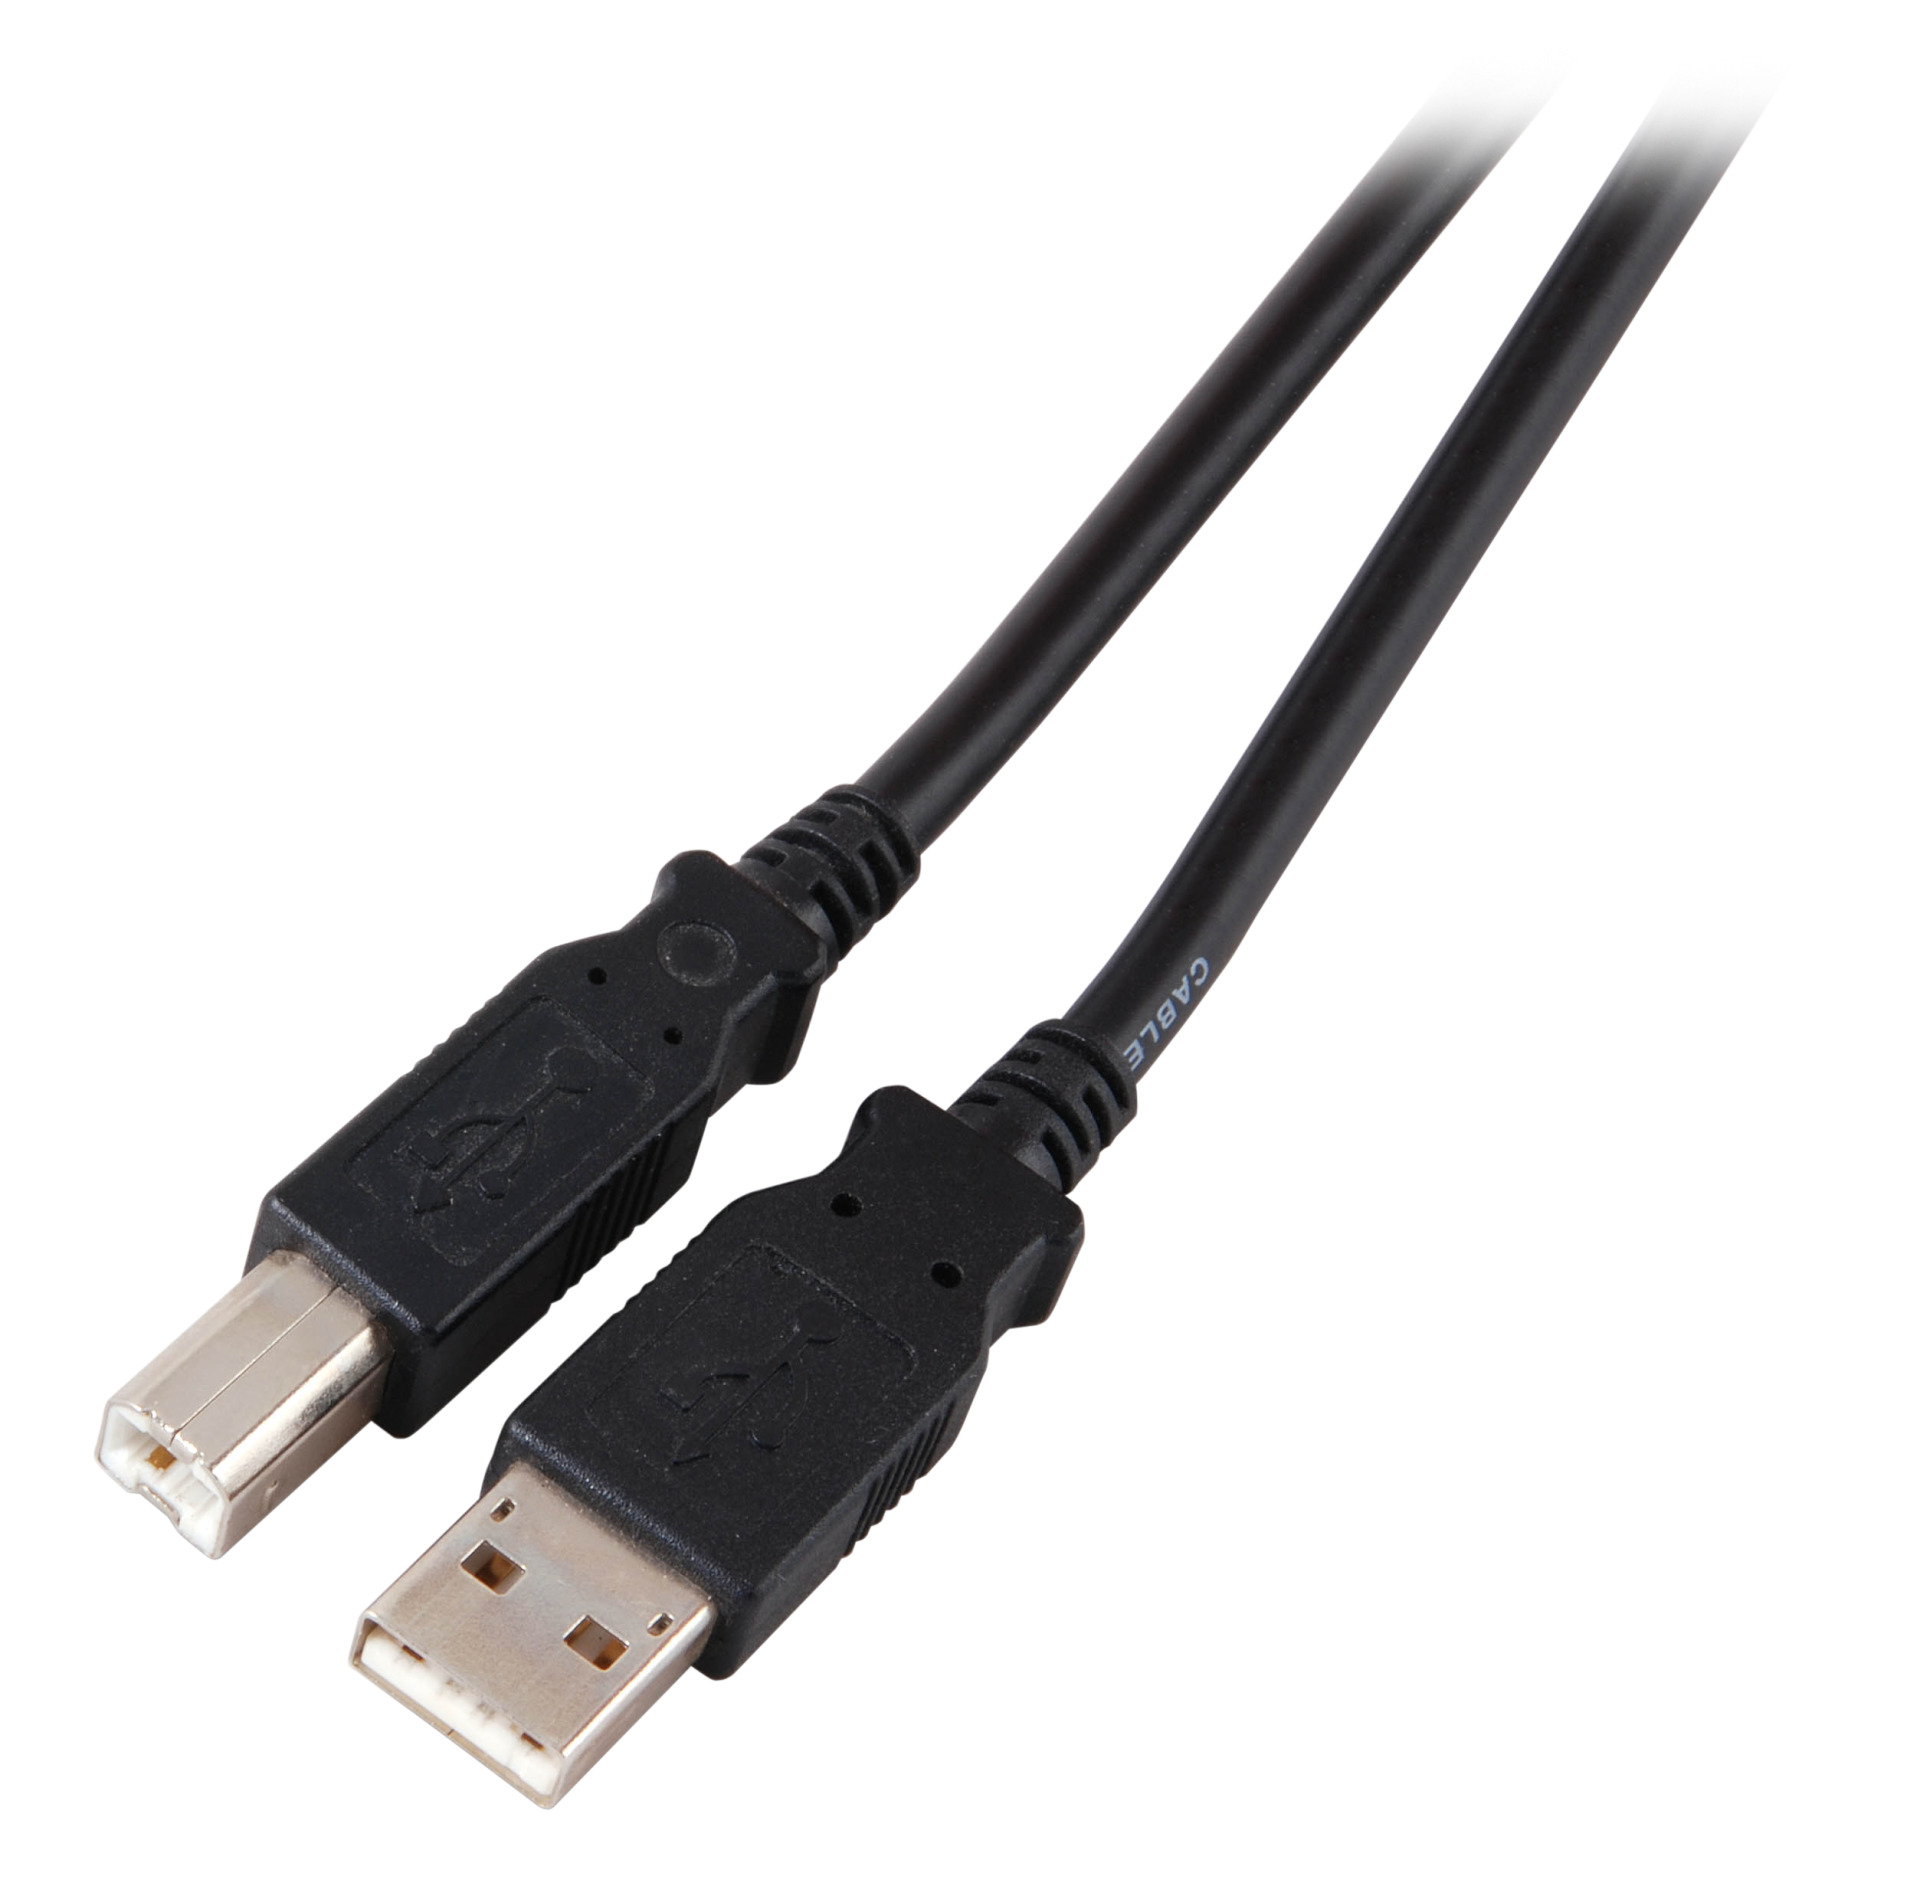 USB2.0 Connection Cable A-B, M-M, 3.0m, grey, Classic